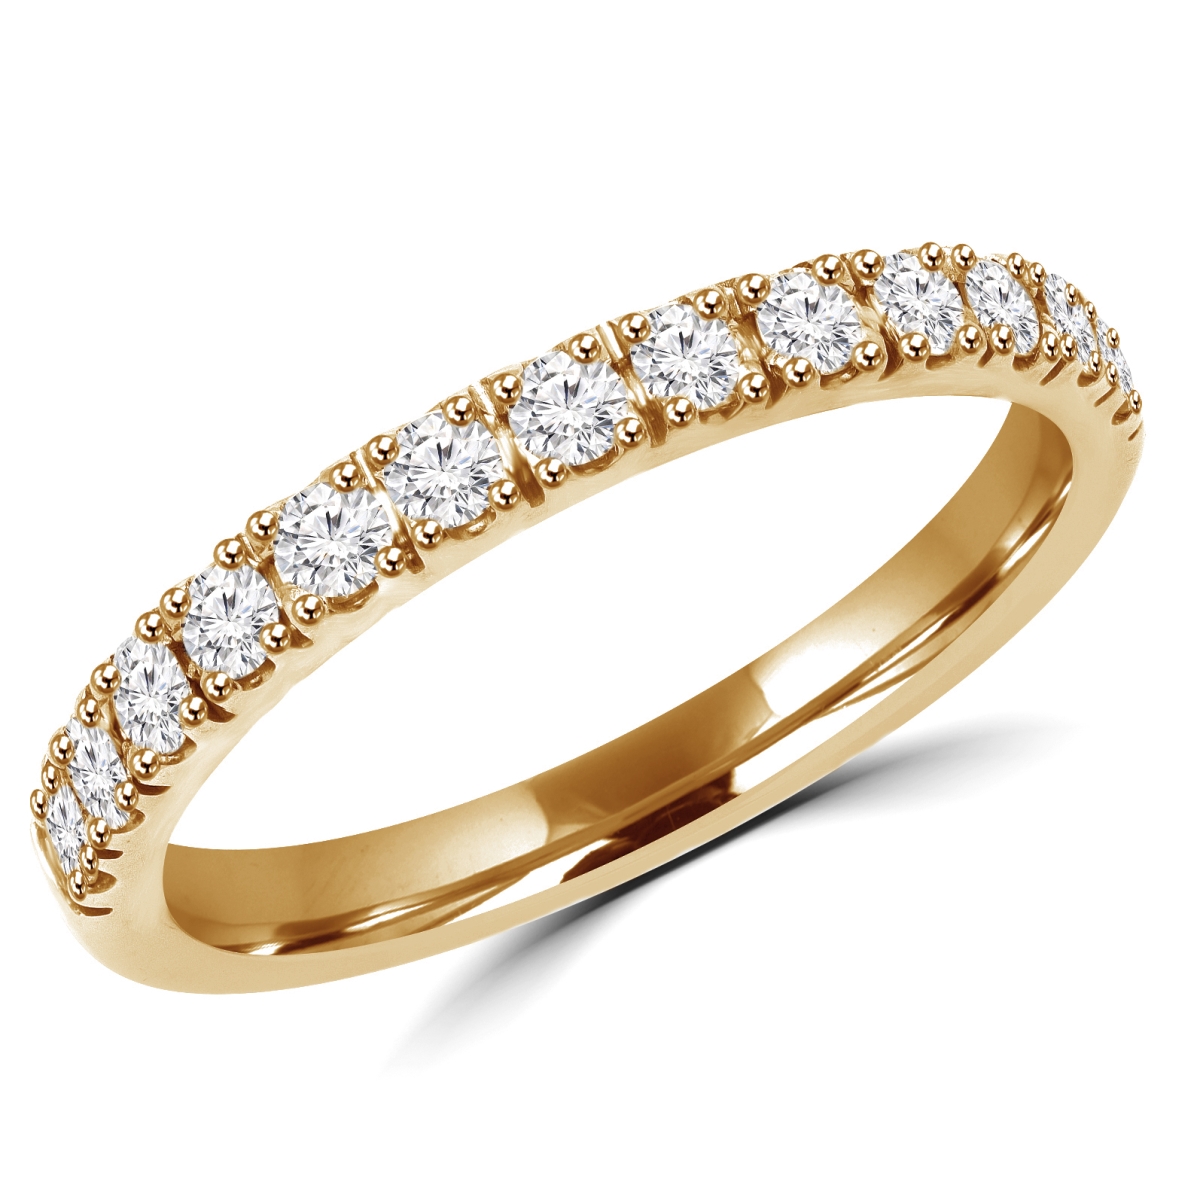 Picture of Majesty Diamonds MD180187-3 0.3 CTW Round Diamond Semi-Eternity Wedding Band Ring in 14K Yellow Gold - Size 3